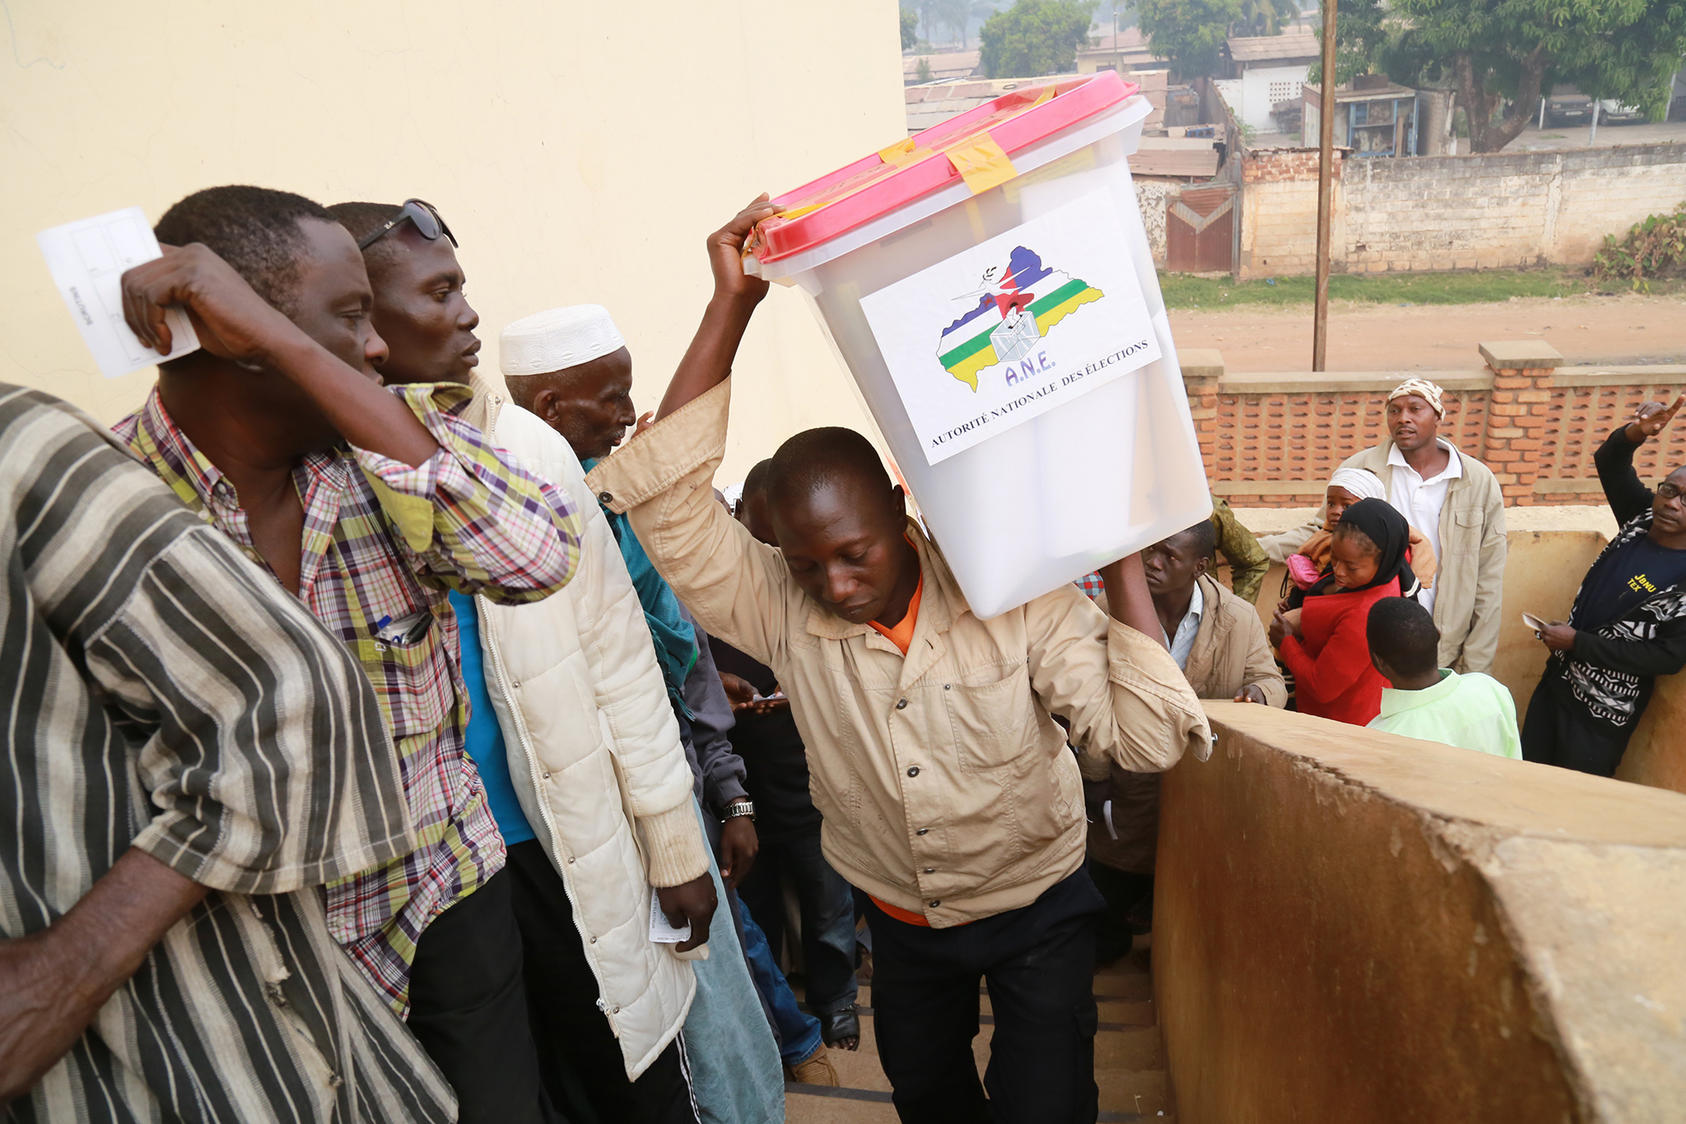 An electoral officer carries election materials into a polling station in Bangui in 2015 as queuing voters look on. (UN Photo/Nektarios Markogiannis)